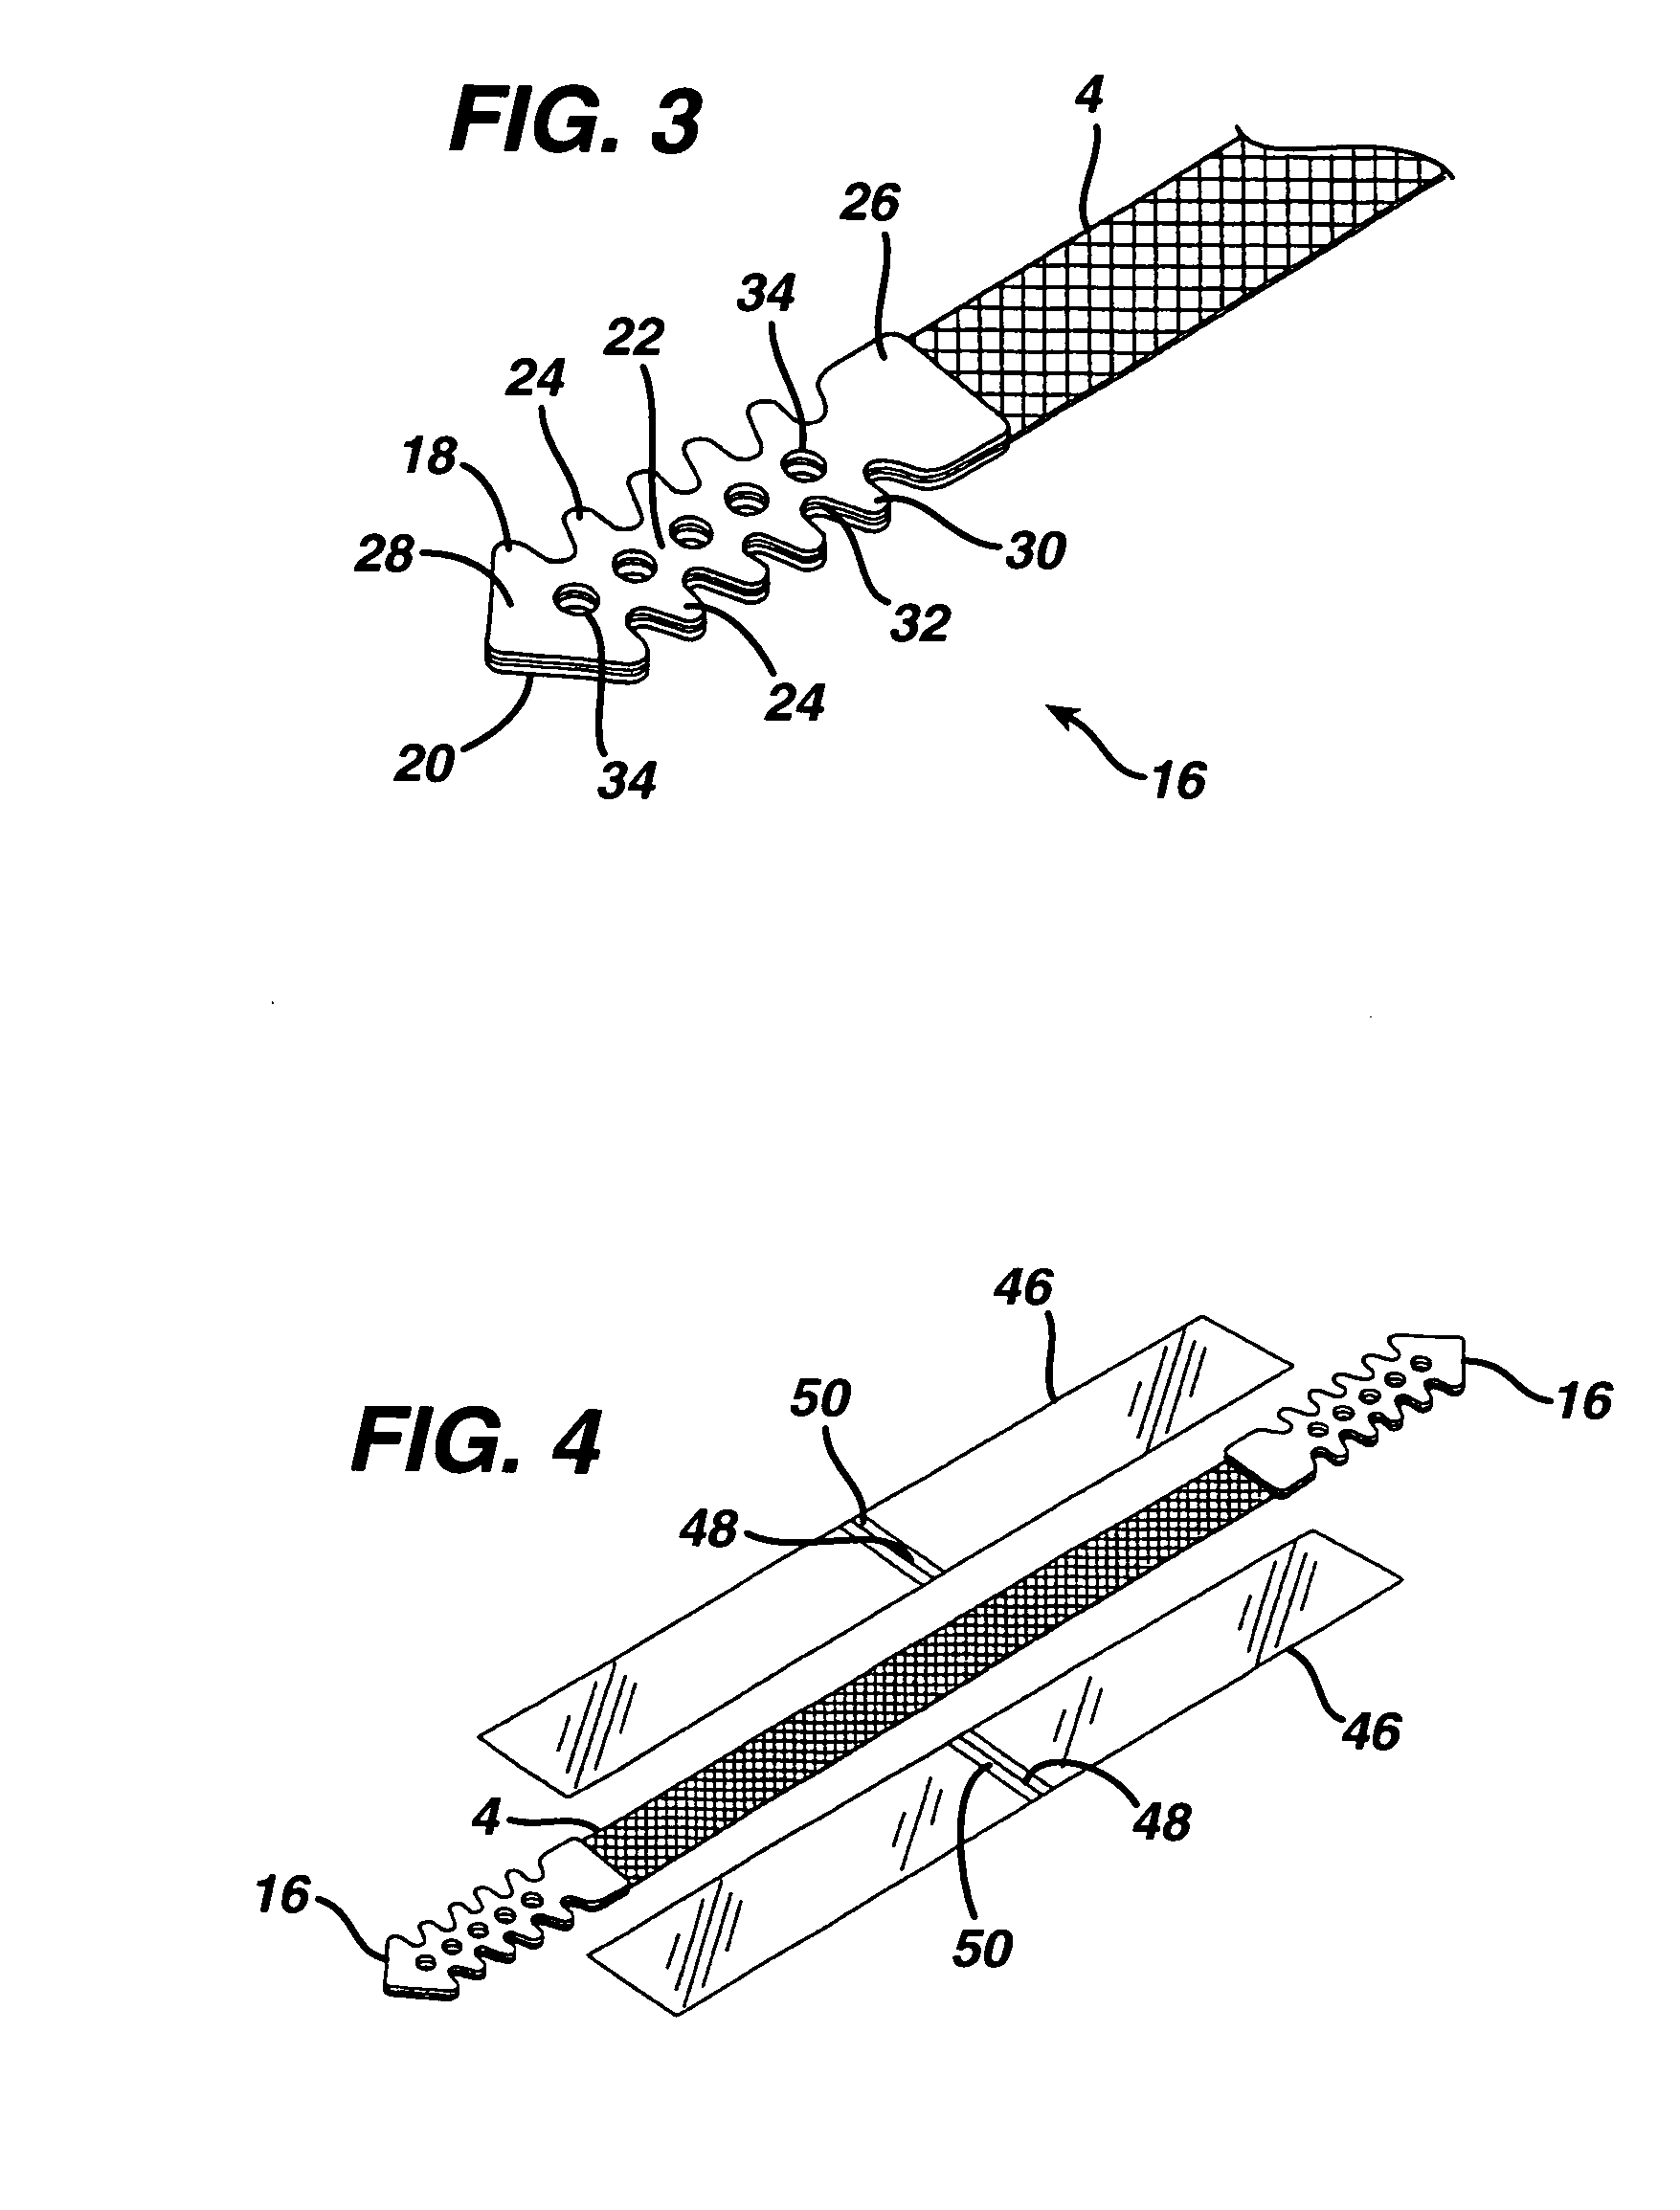 Minimally invasive medical implant and insertion device and method for using the same